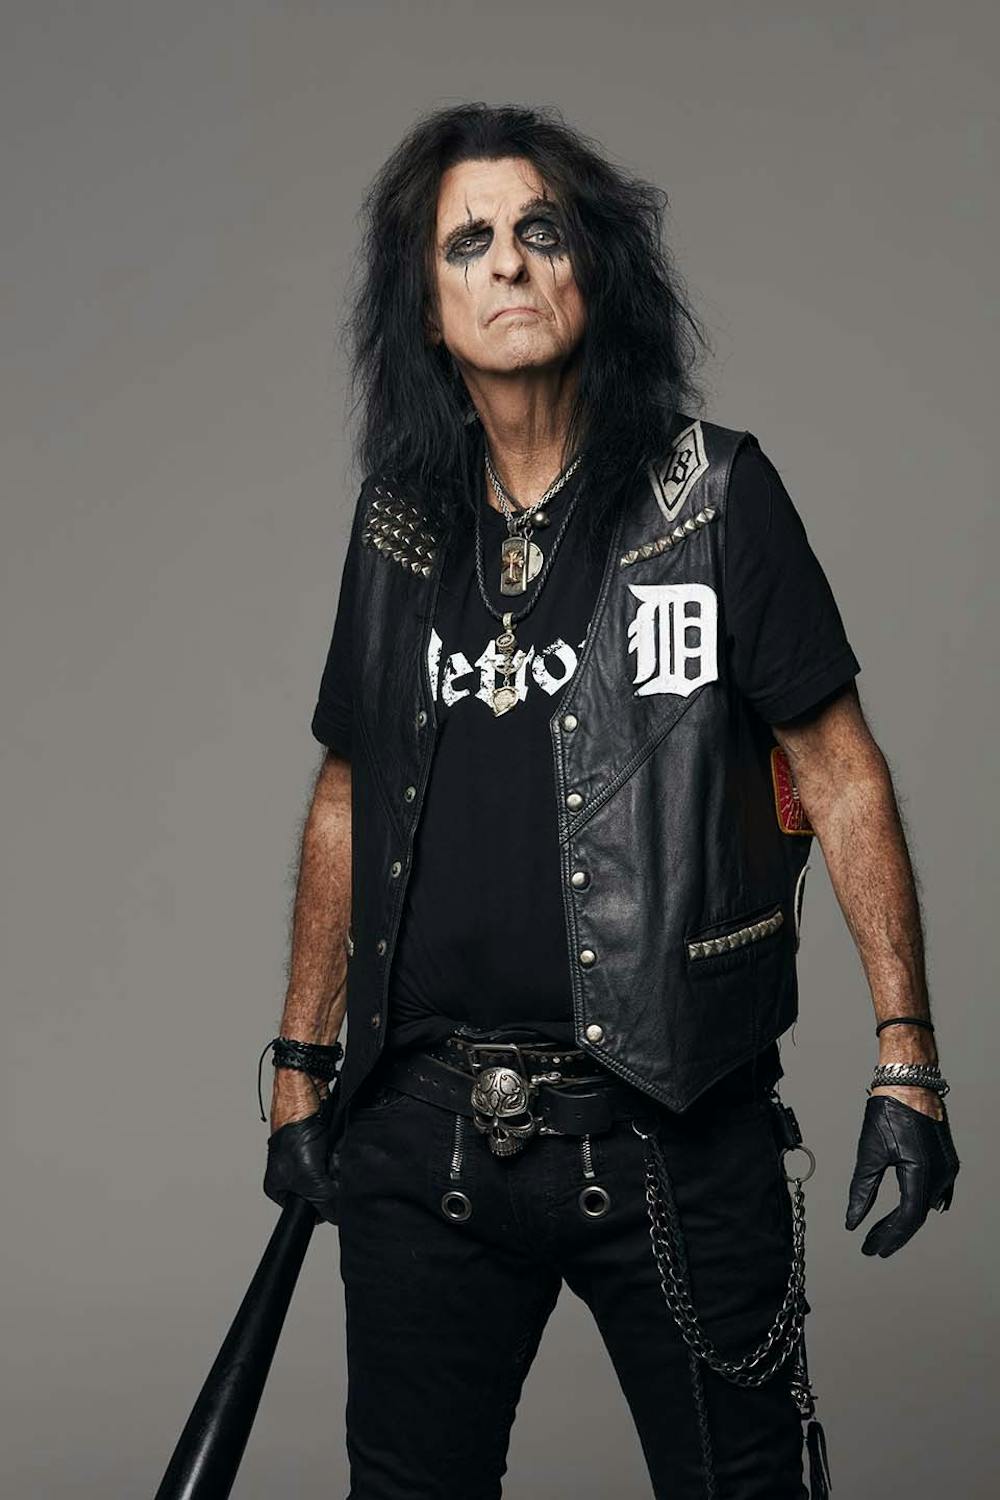 Alice Cooper is coming to Emens Auditorium! Ball State Daily